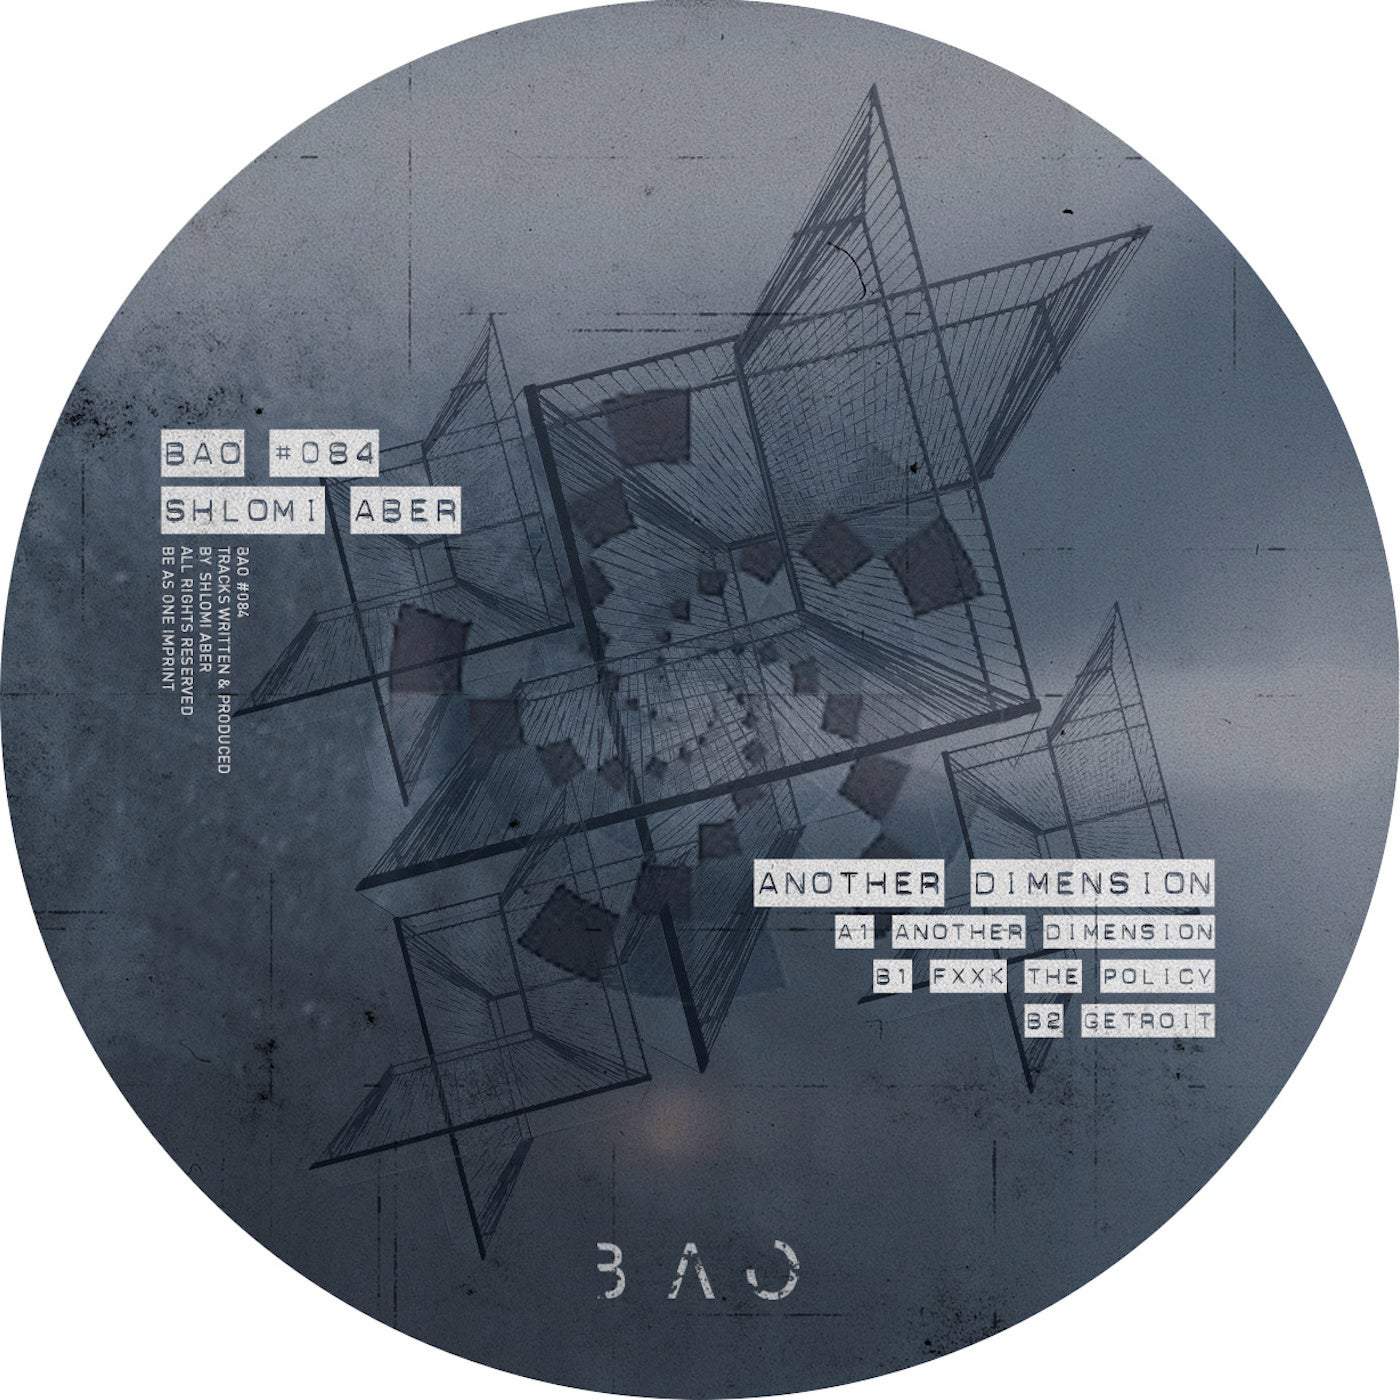 image cover: Shlomi Aber - Another Dimension / BAO084